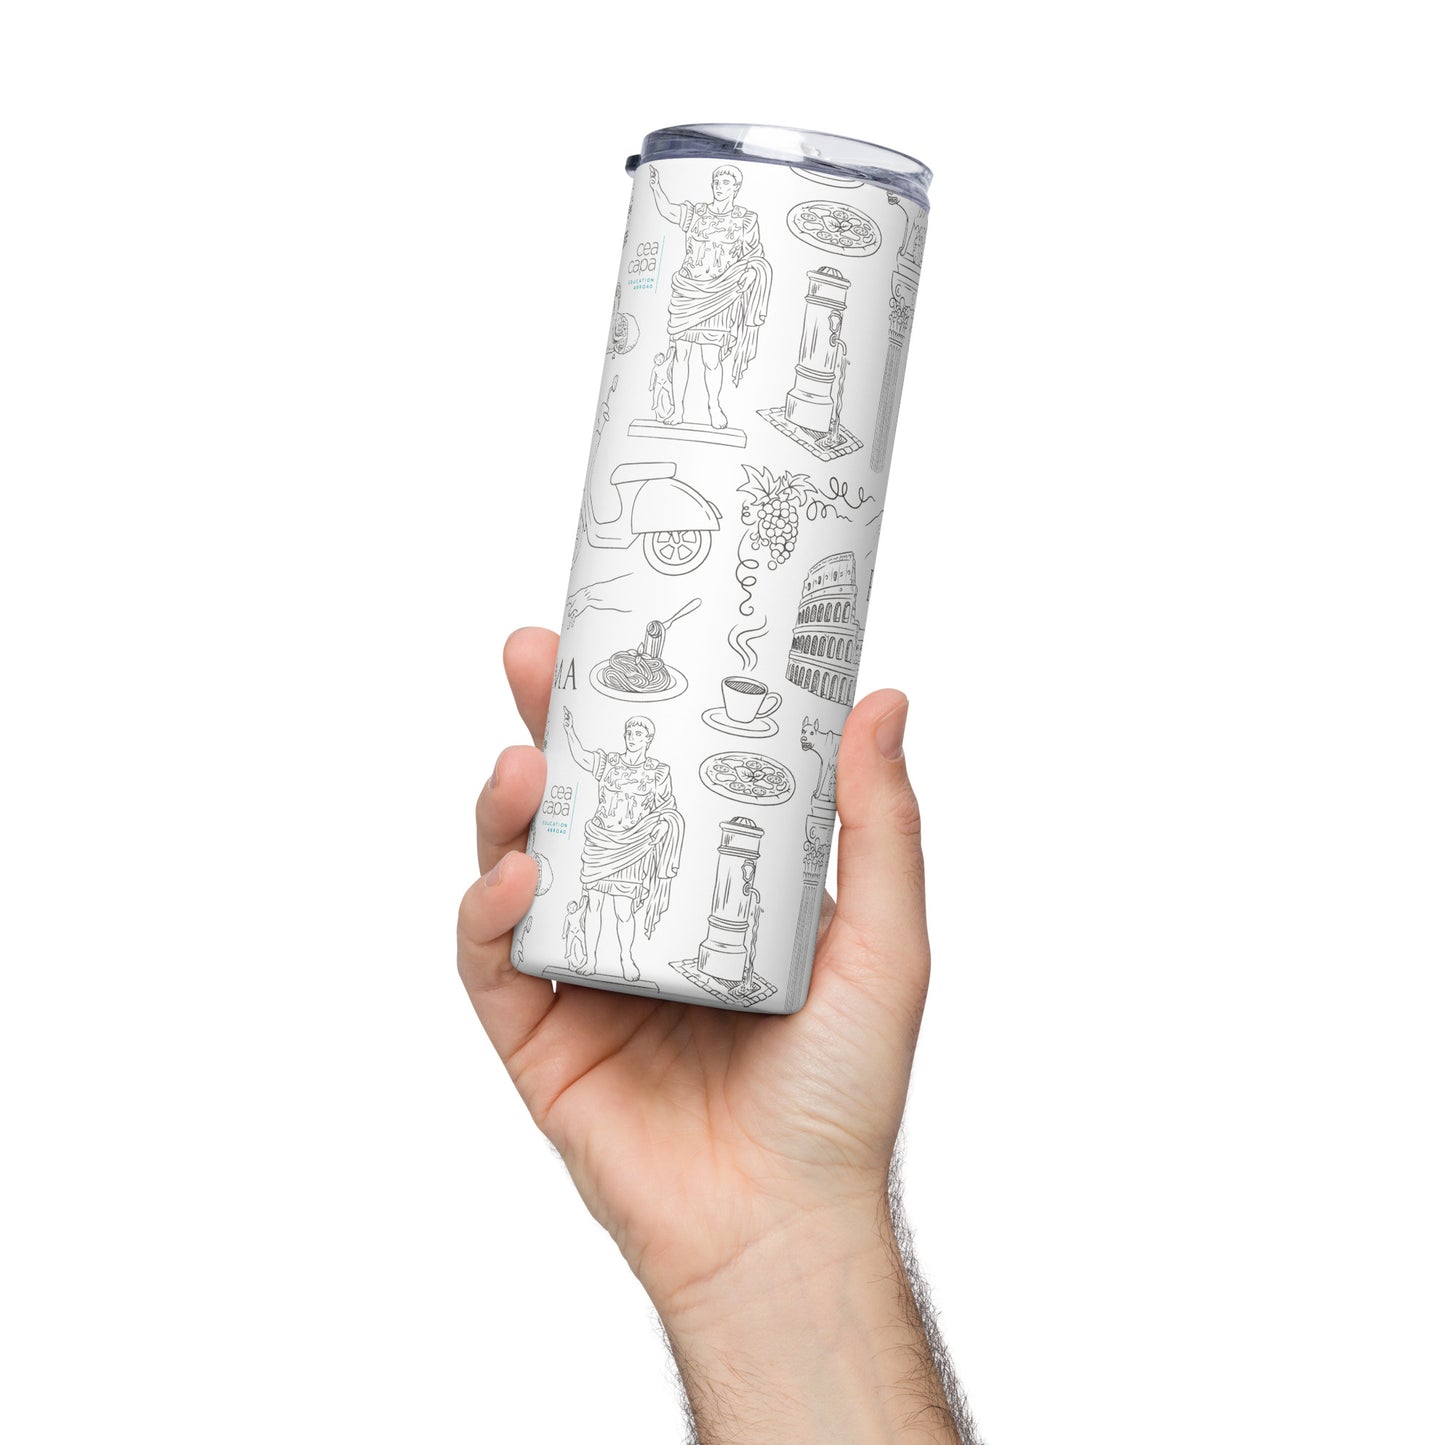 Rome Icons Stainless Steel Tumbler